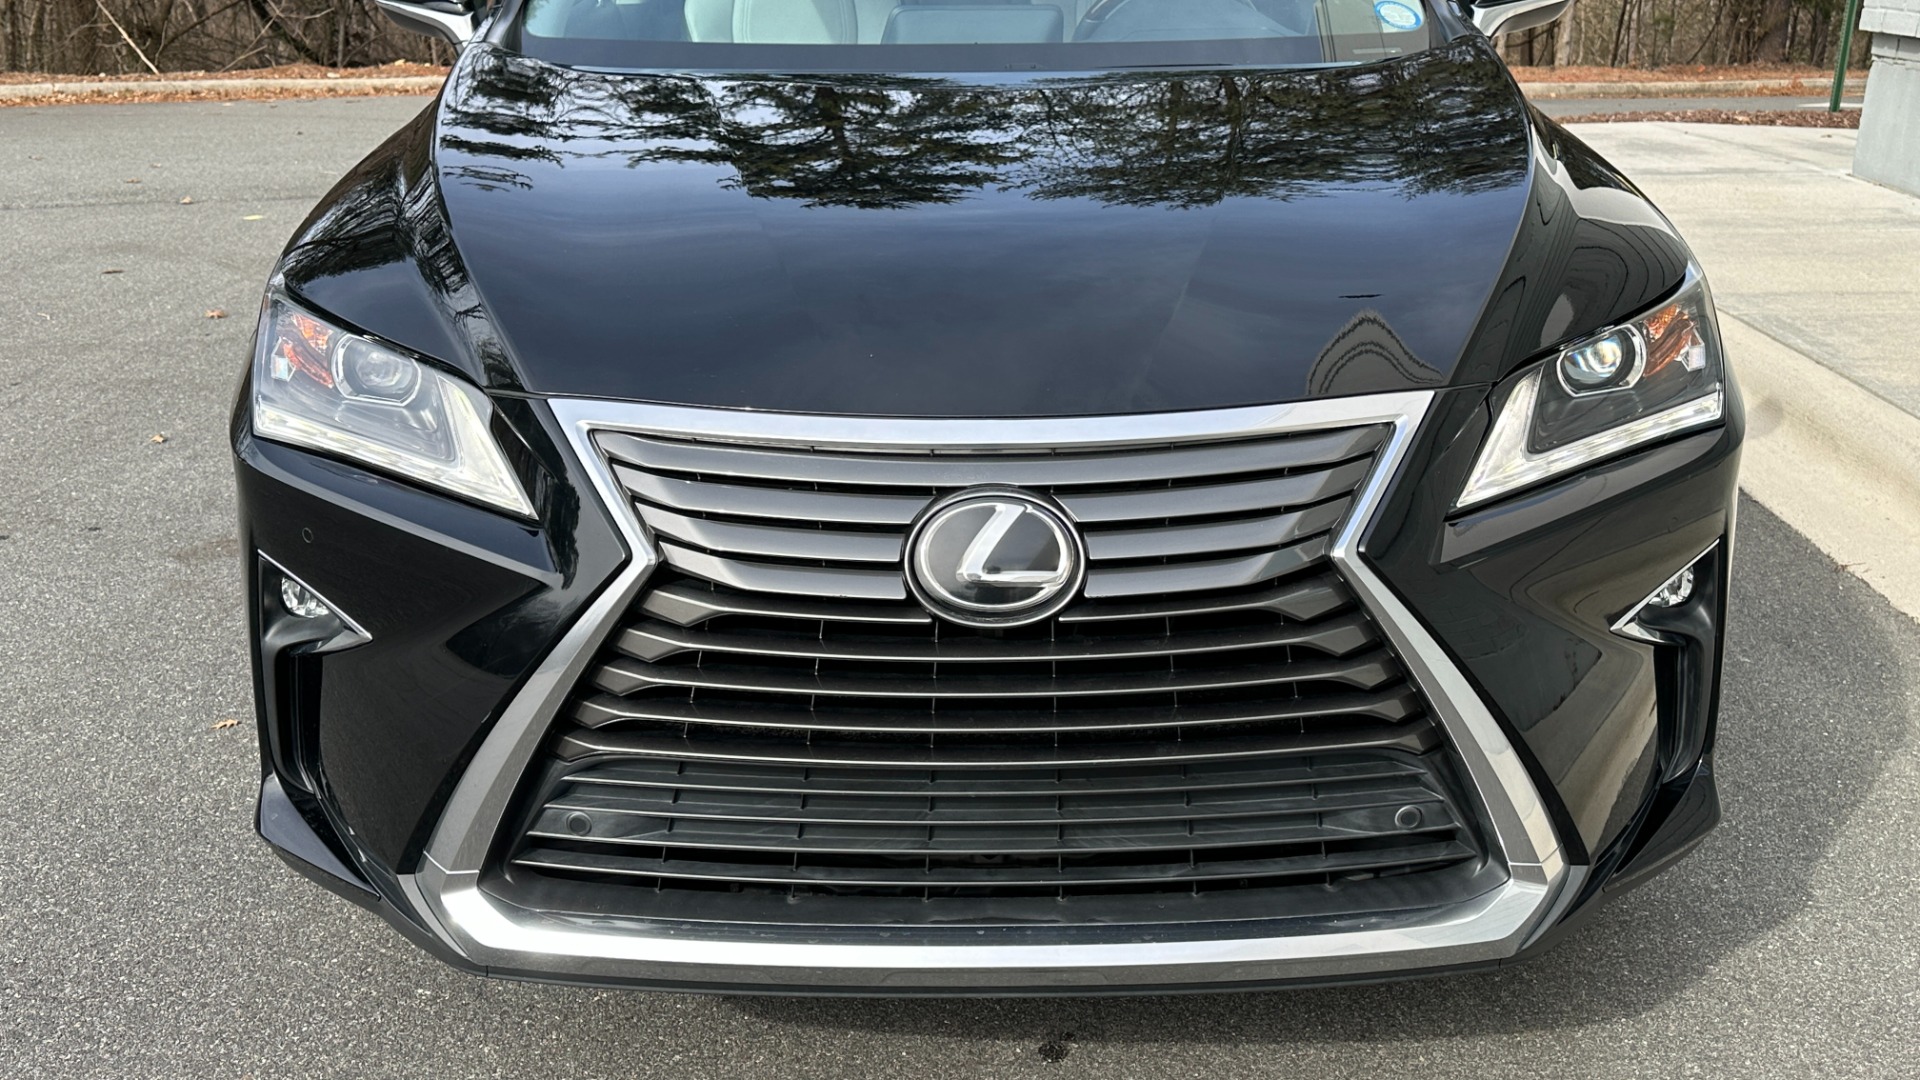 Used 2018 Lexus RX 350 3.5L V6 / PREMIUM / BLIND SPOT MONITOR / VENT STS / REARVIEW for sale $46,595 at Formula Imports in Charlotte NC 28227 44